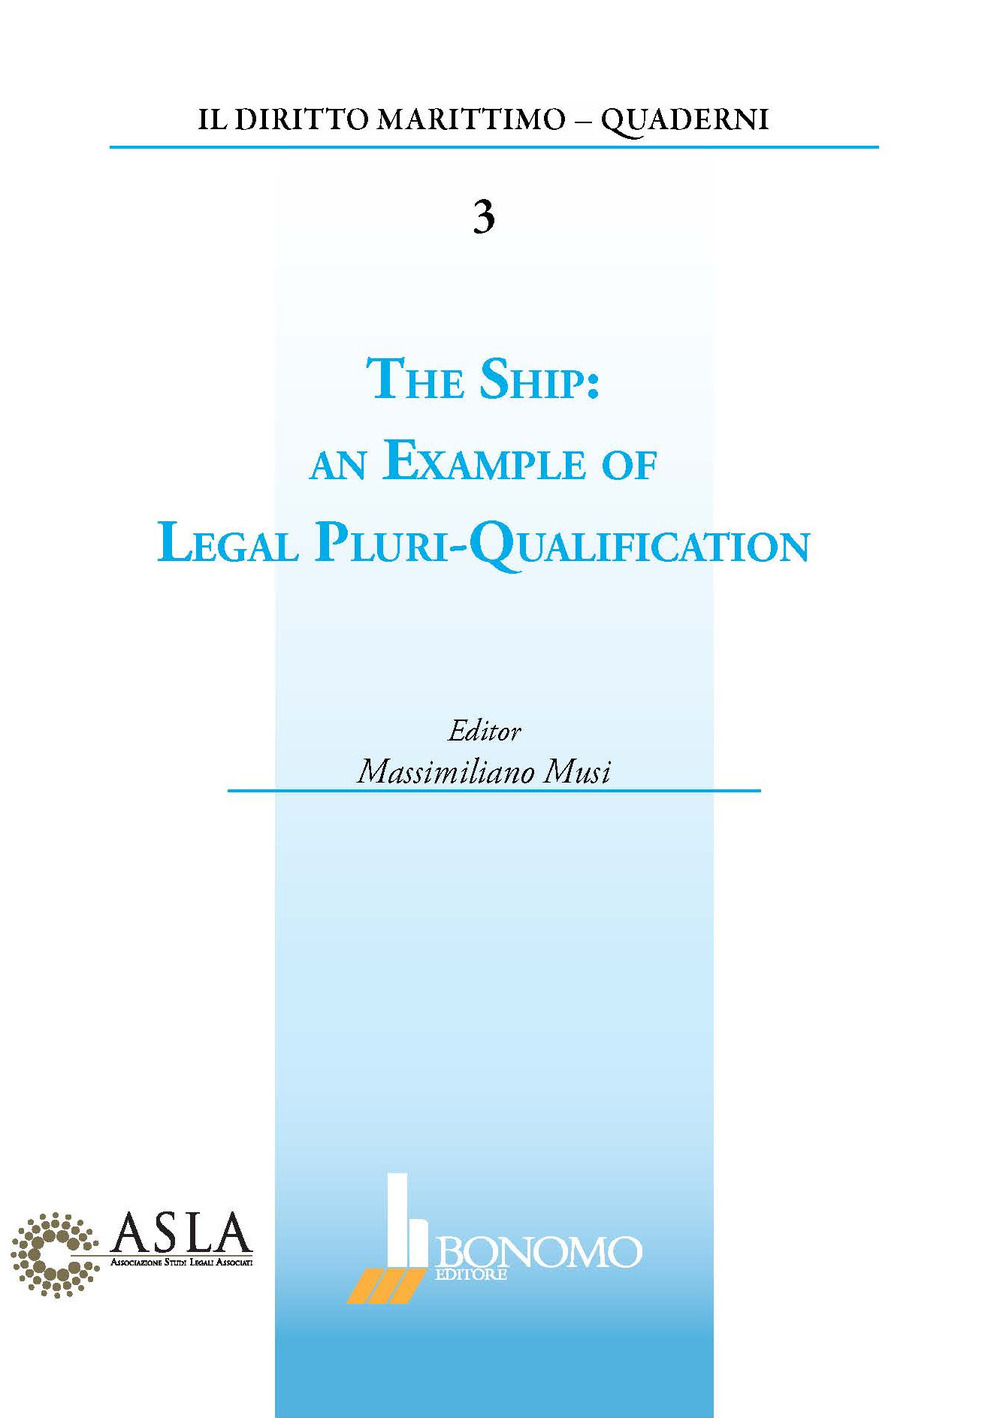 The ship: an example of legal pluri-qualification